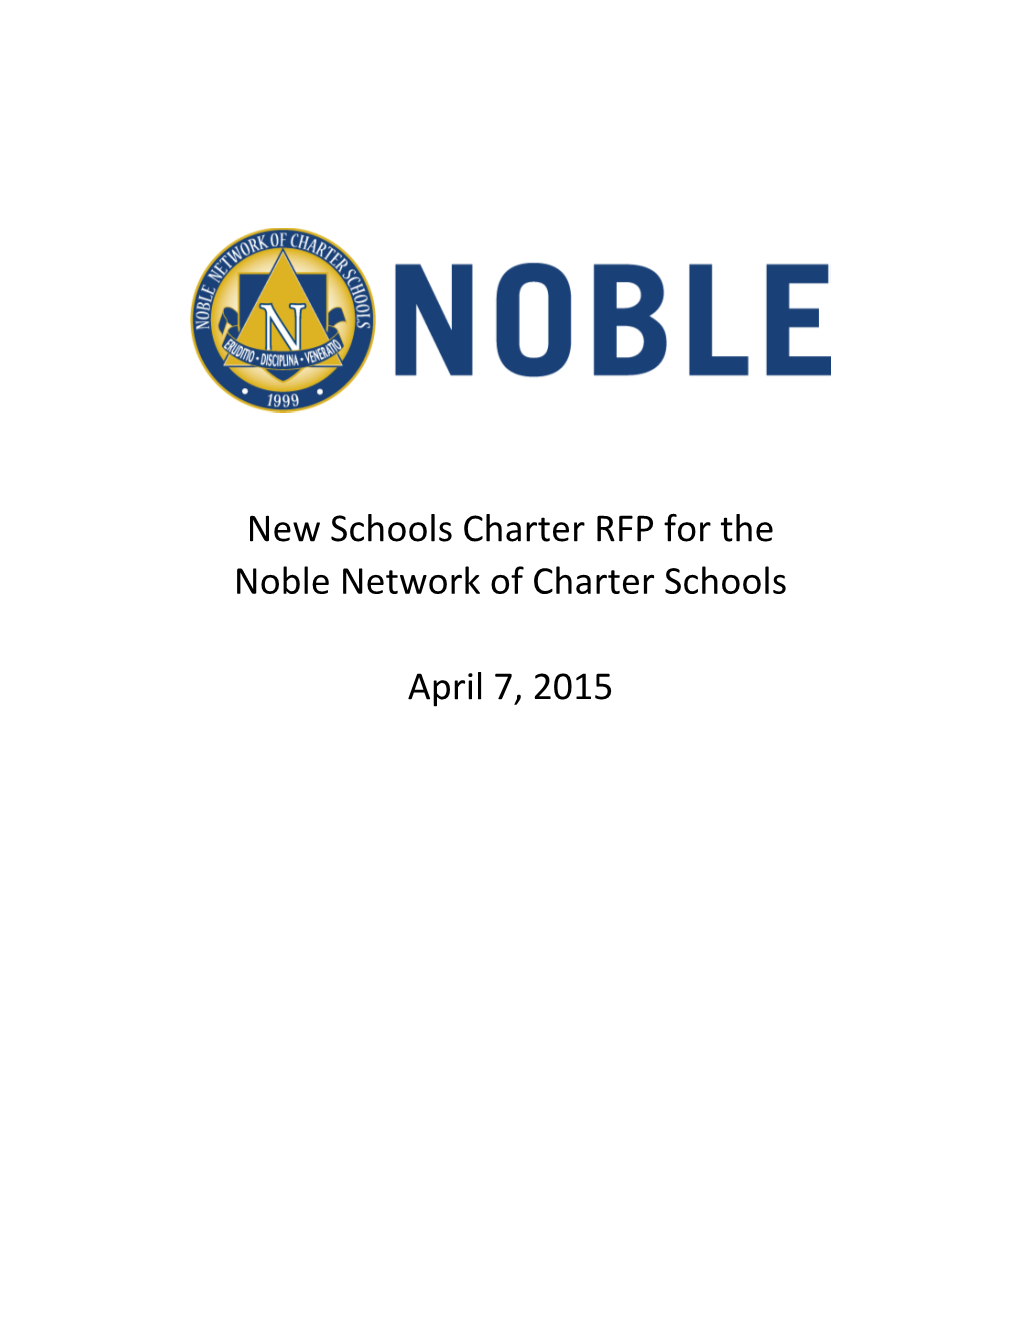 New Schools Charter RFP for the Noble Network of Charter Schools